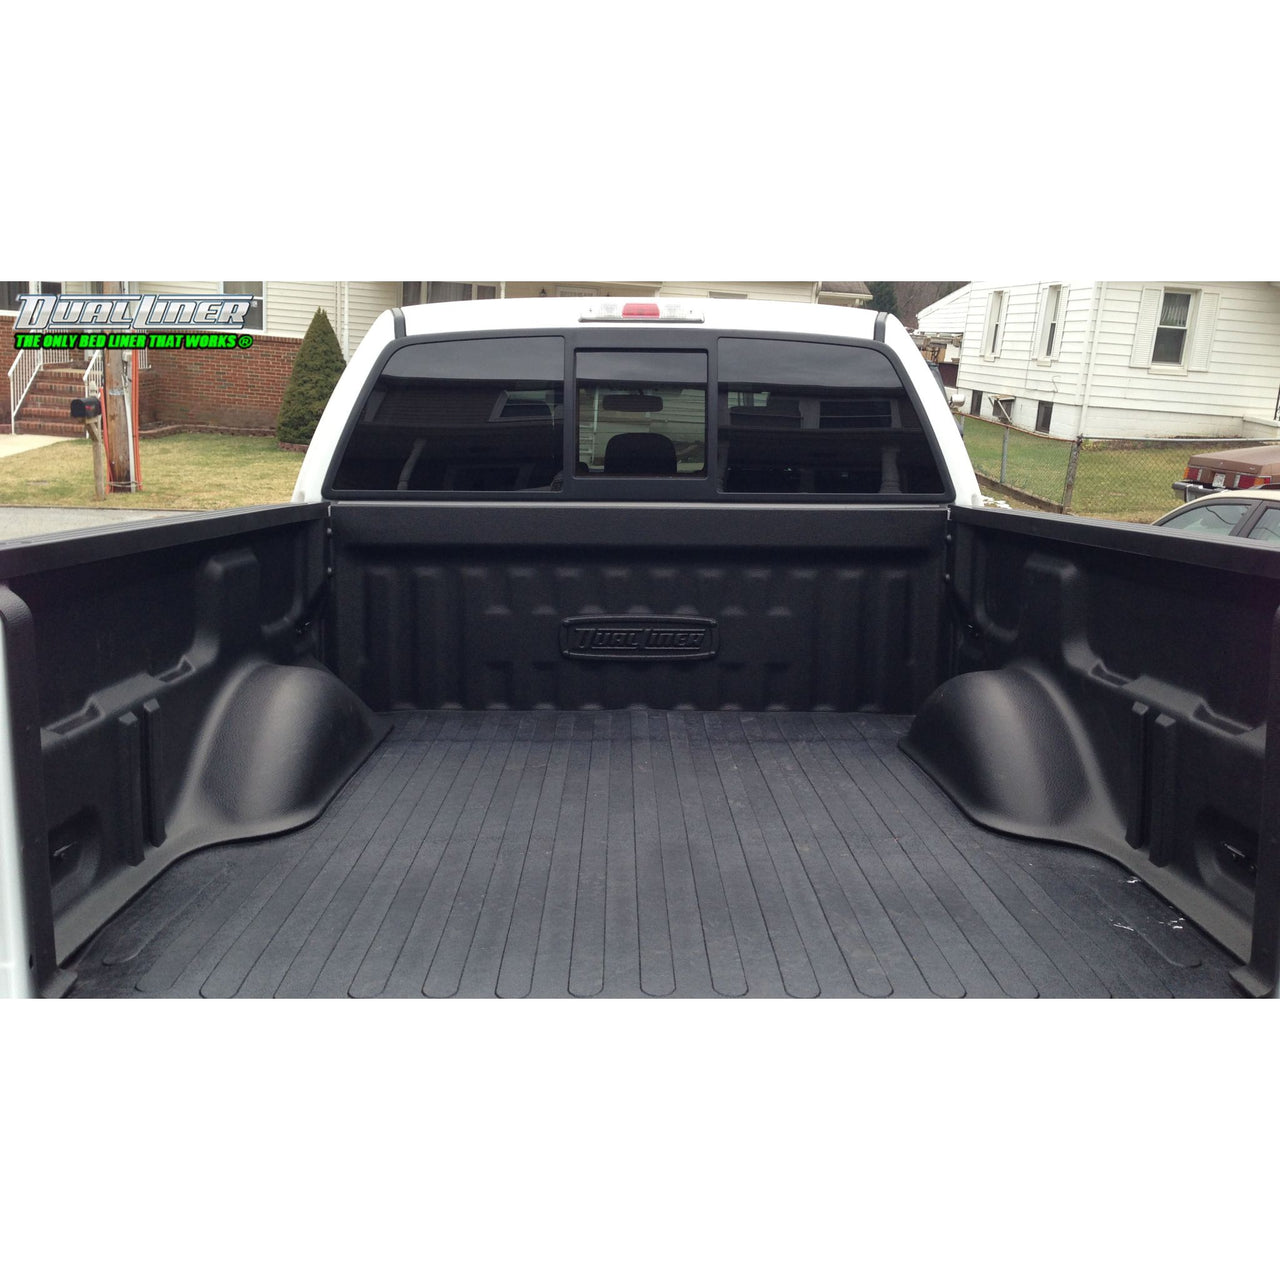 DualLiner 2011 to 2016 F-250 /F-350 (w/ factory tailgate step) - Long 8' Bed